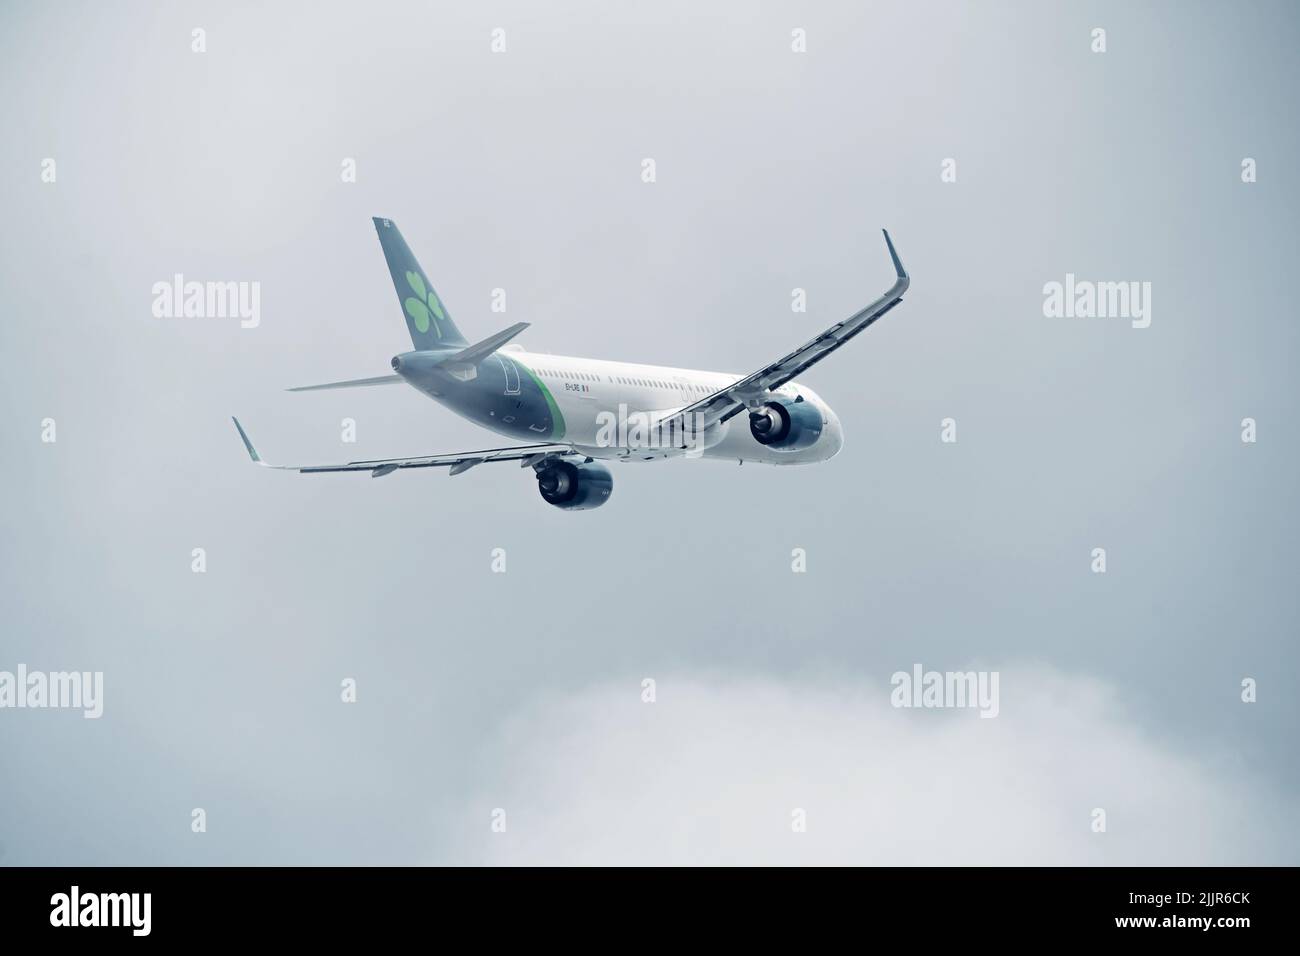 A shot of an Aer Lingus Airbus A320 departing from the Dublin Airport Stock Photo